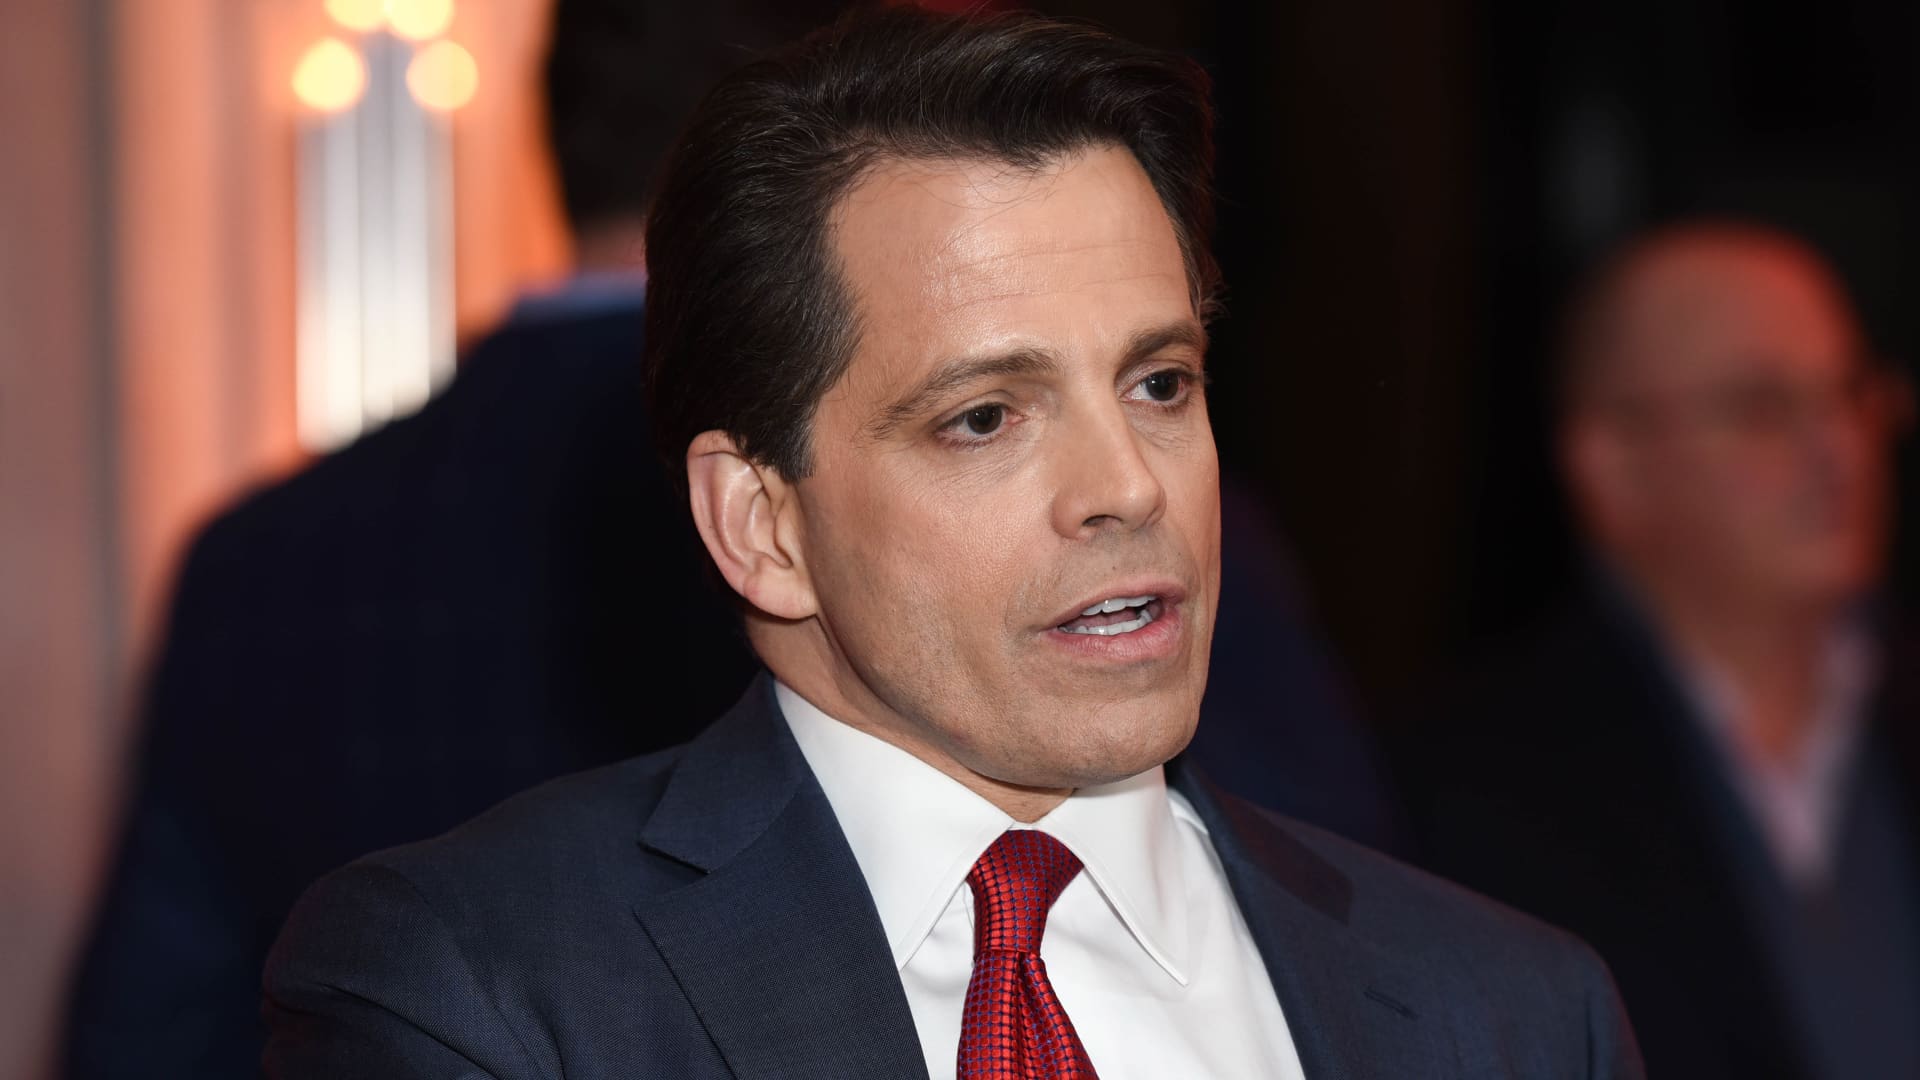 Op-ed: Blockchain and crypto need a trellis, not just a weed killer, says Scaramucci